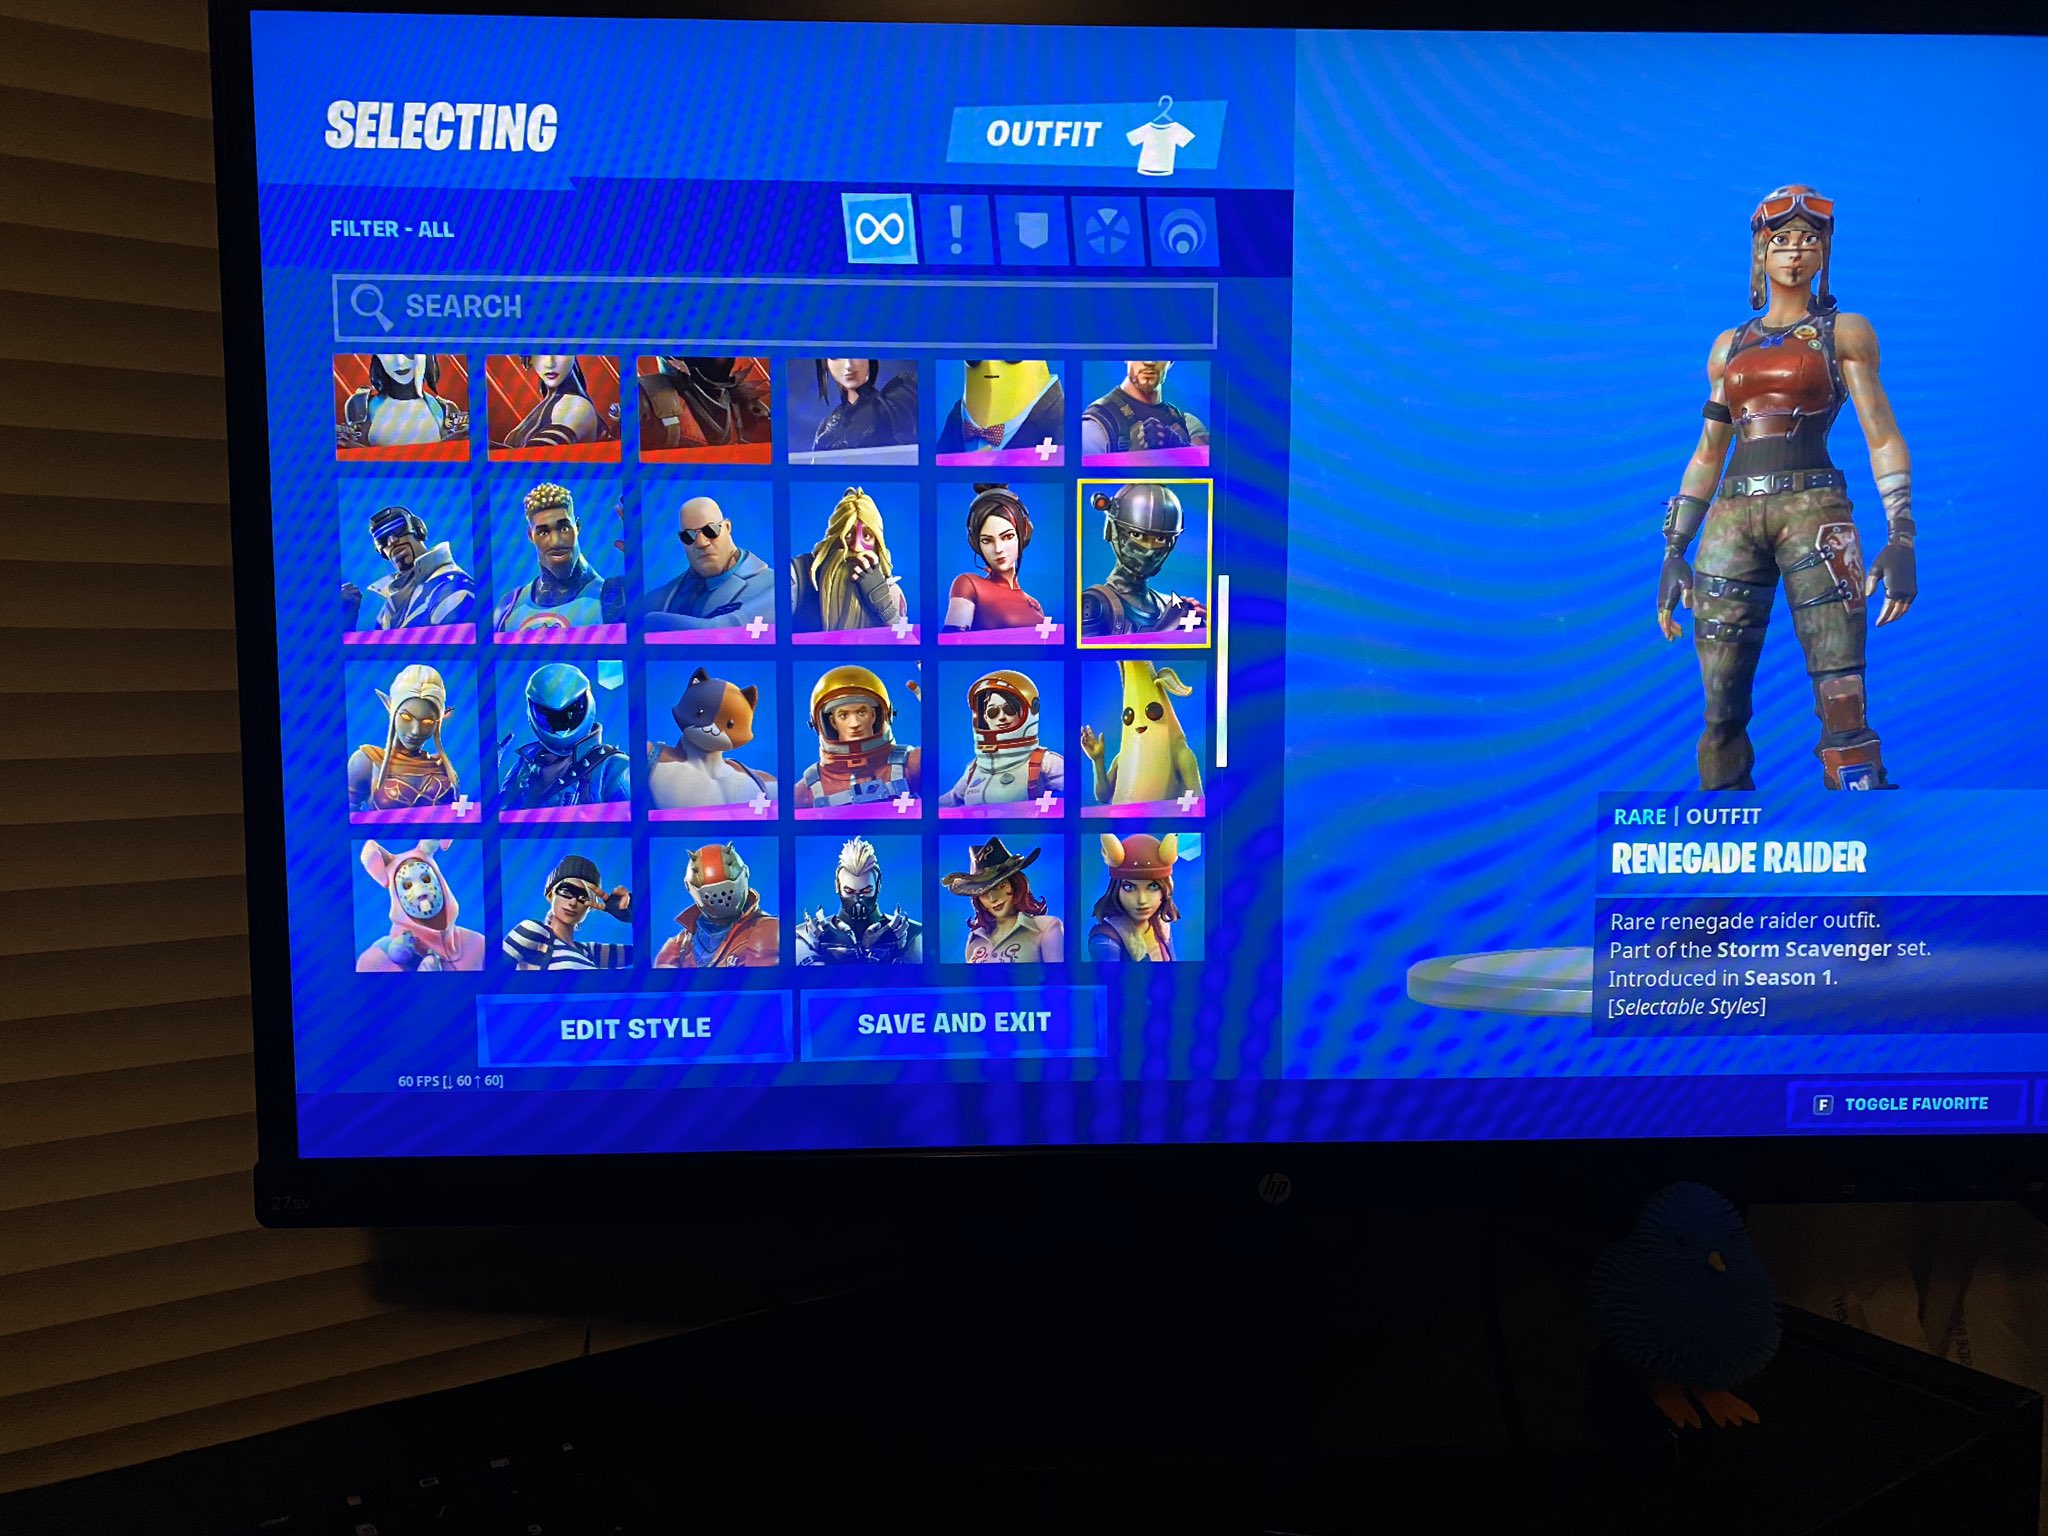 beware on Twitter: "Trading my Raider Account only for a account likable to PS4 serious offers only can show any proof needed waste my time HMU #renegaderaideraccount #Fortnite #sellingfortnite #renegaderaider #